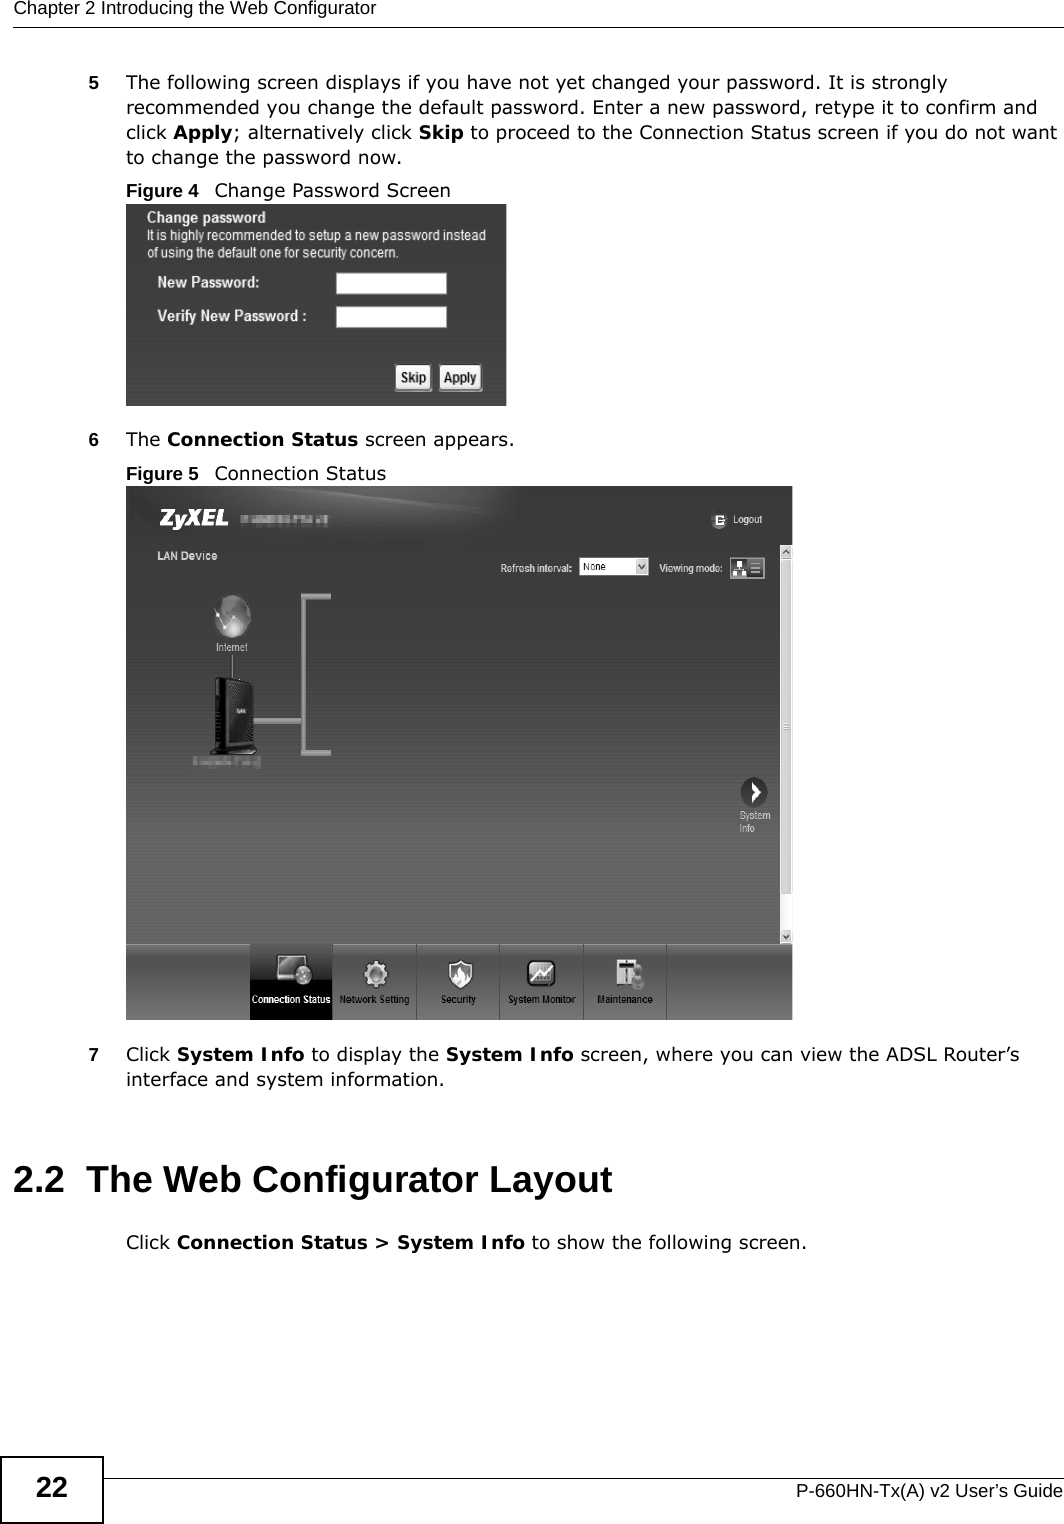 Chapter 2 Introducing the Web ConfiguratorP-660HN-Tx(A) v2 User’s Guide225The following screen displays if you have not yet changed your password. It is strongly recommended you change the default password. Enter a new password, retype it to confirm and click Apply; alternatively click Skip to proceed to the Connection Status screen if you do not want to change the password now.Figure 4   Change Password Screen6The Connection Status screen appears.Figure 5   Connection Status 7Click System Info to display the System Info screen, where you can view the ADSL Router’s interface and system information. 2.2  The Web Configurator LayoutClick Connection Status &gt; System Info to show the following screen.